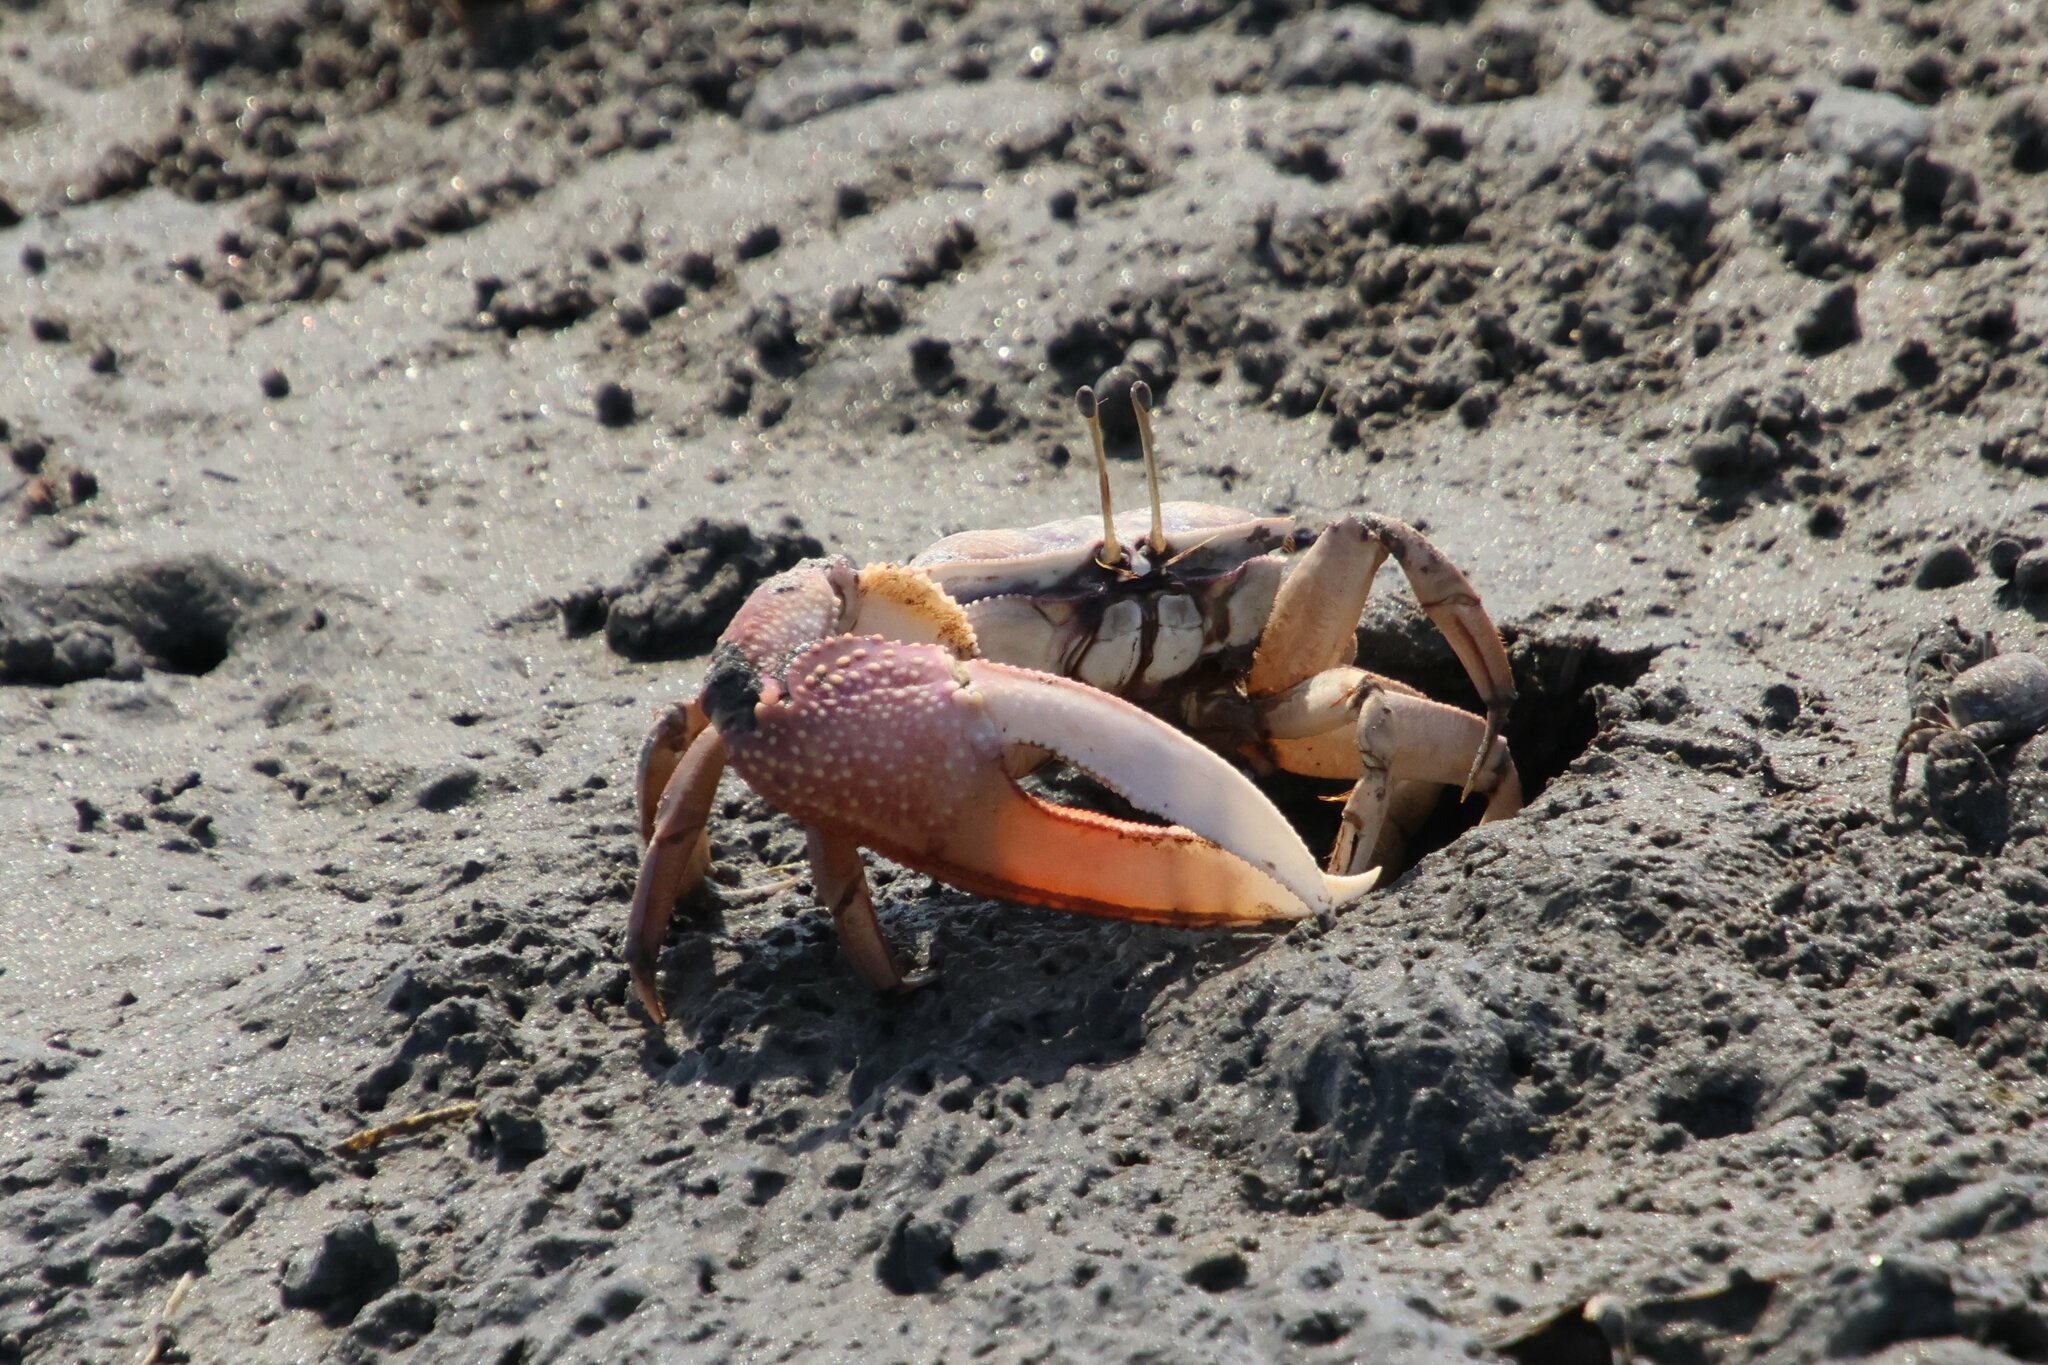 Male Fiddler Crabs Use Vibrations To Lure Females Into Burrows